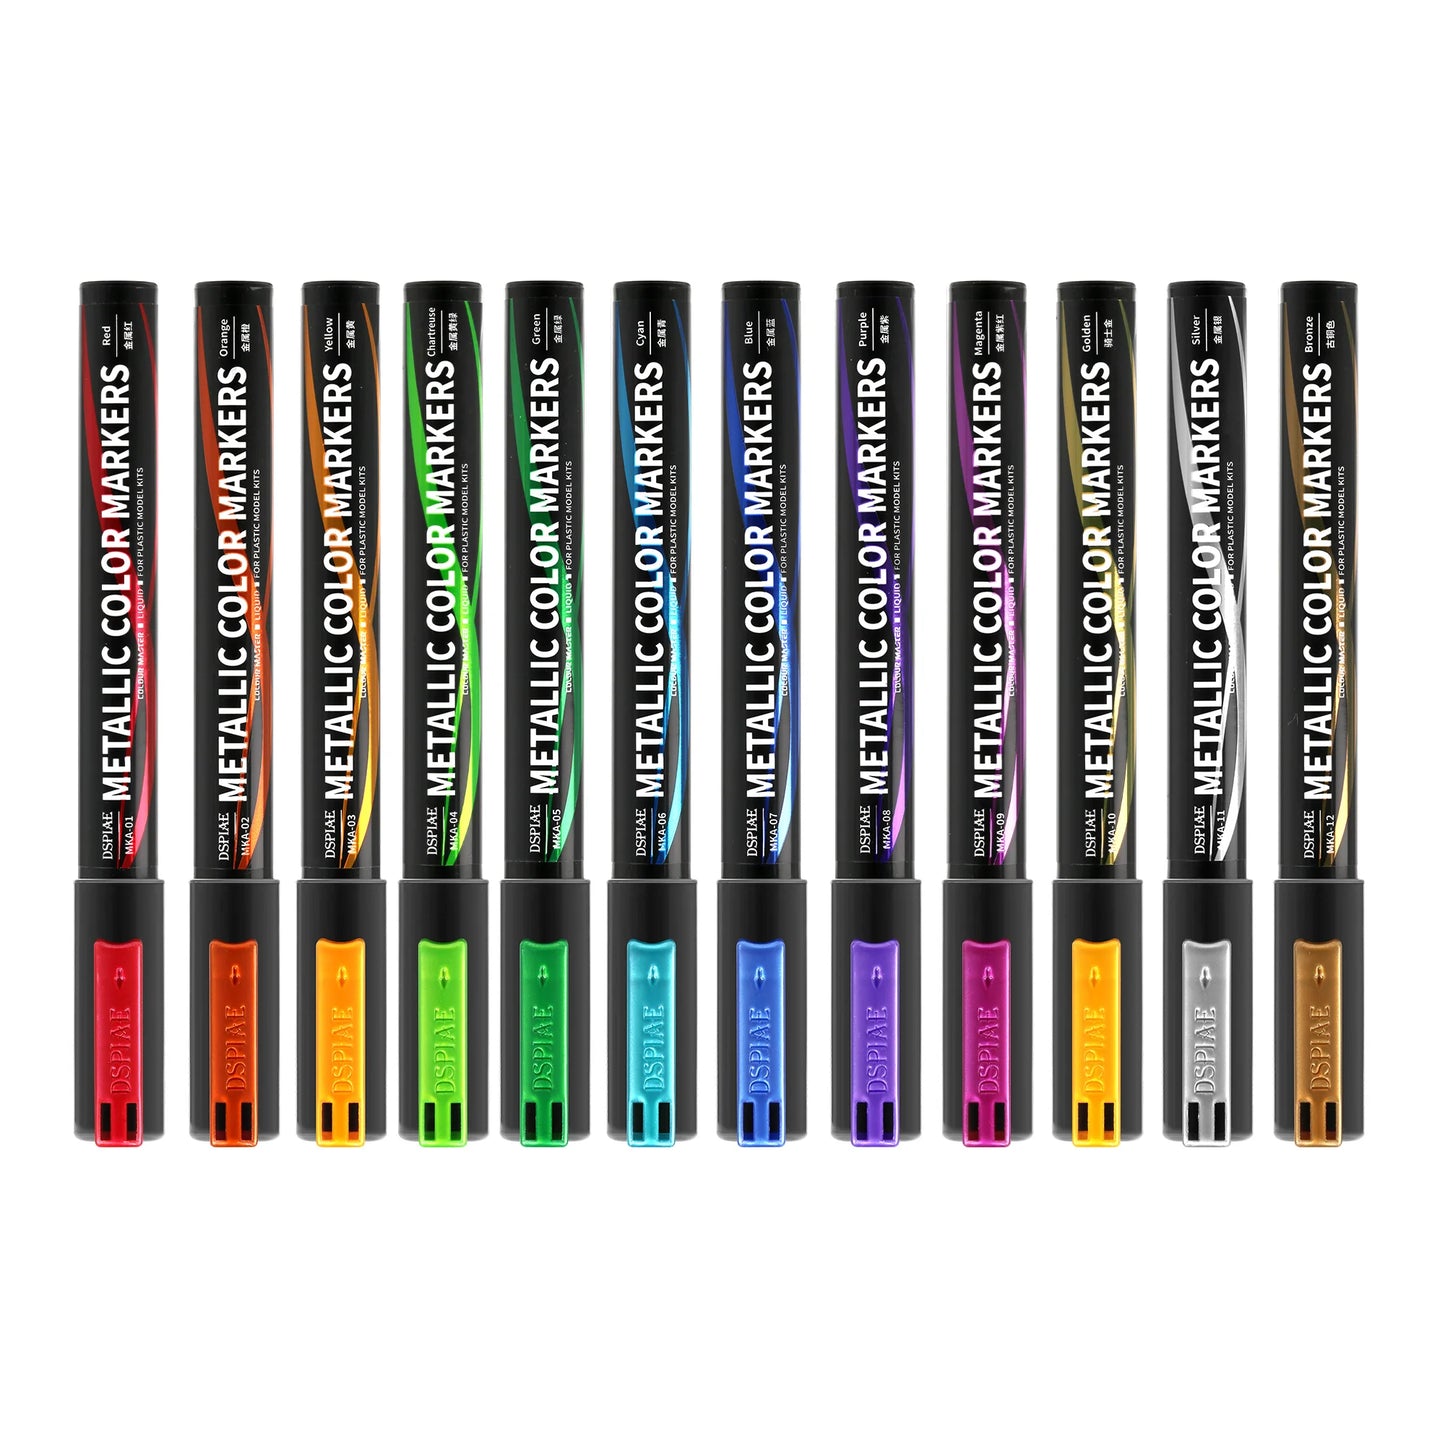 DSPIAE - MKA Super Metallic Paint Markers (Select from 12 Colors)